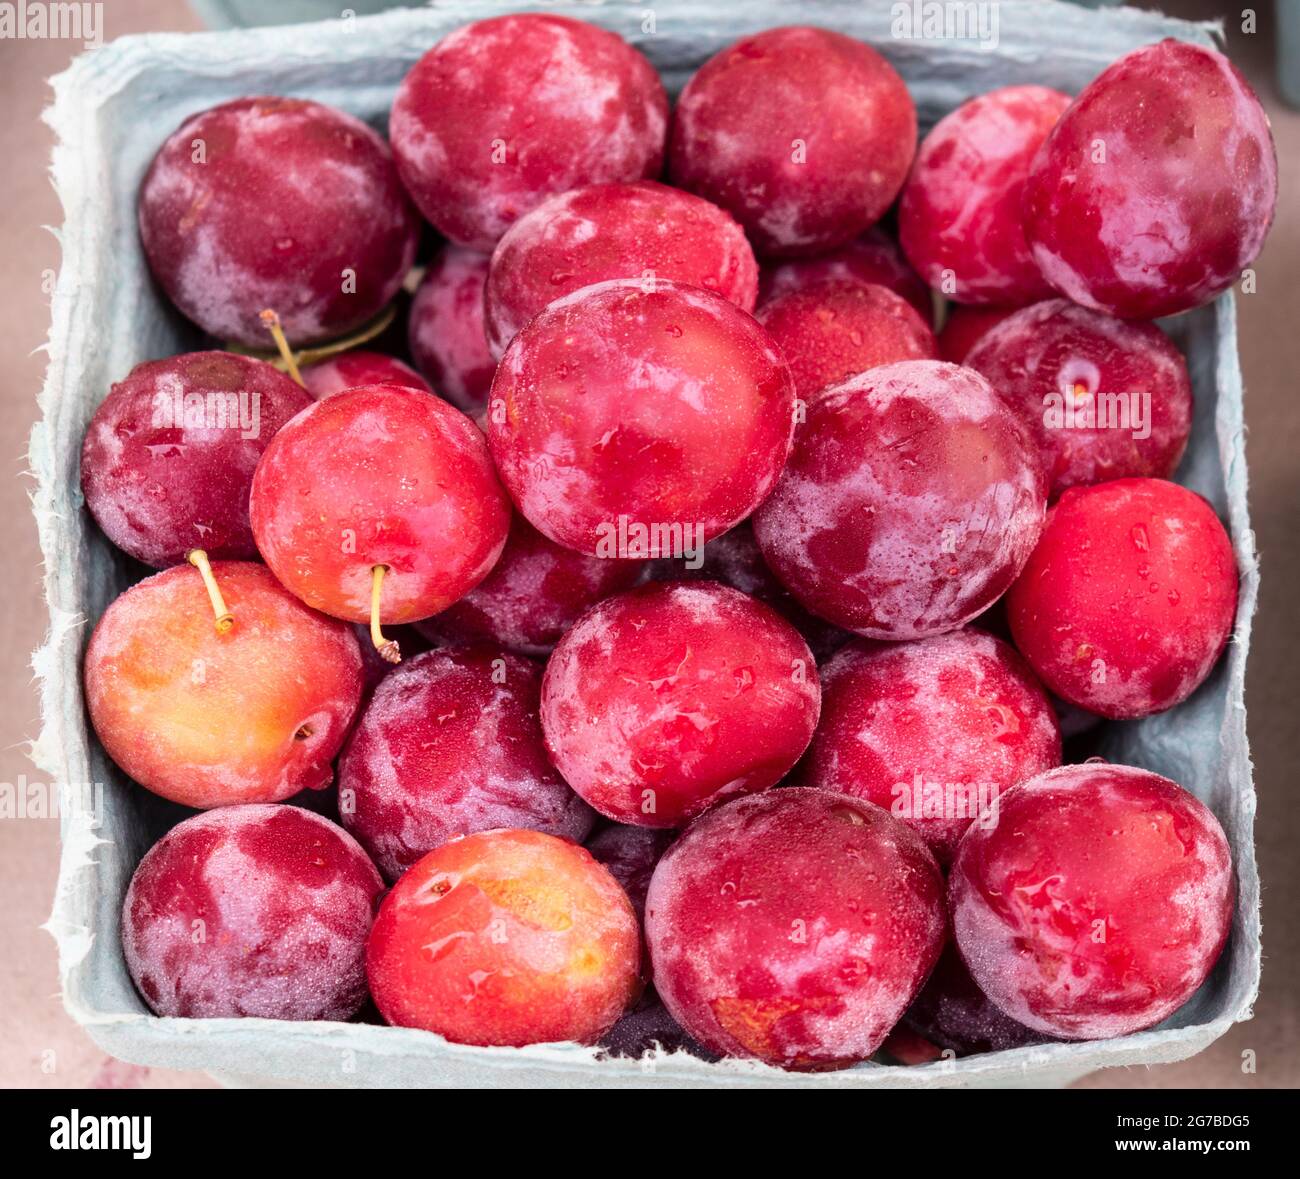 Carton filled of stone fruit, cherry plums. Stock Photo